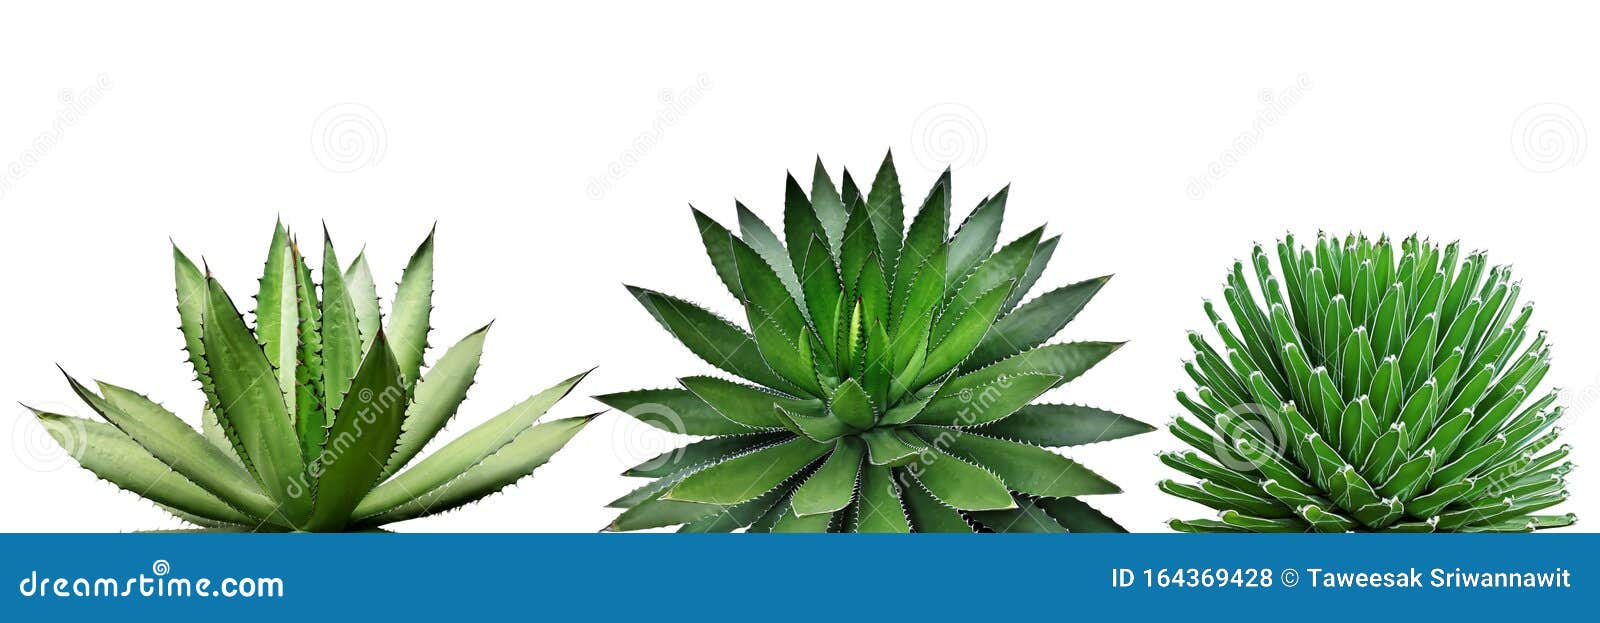 agave plants  on white background with clipping path